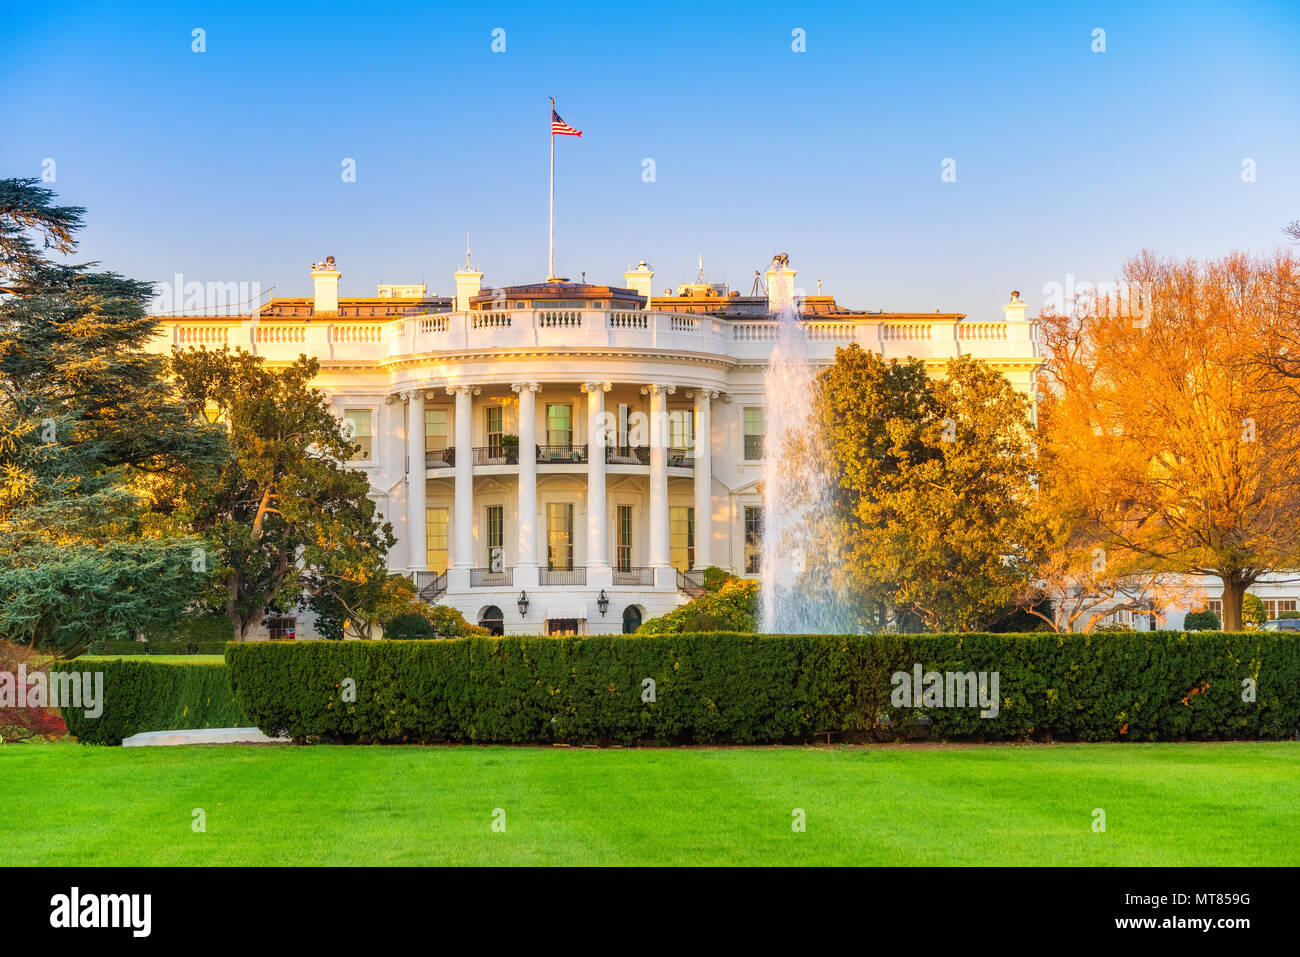 The White House at sunset Stock Photo